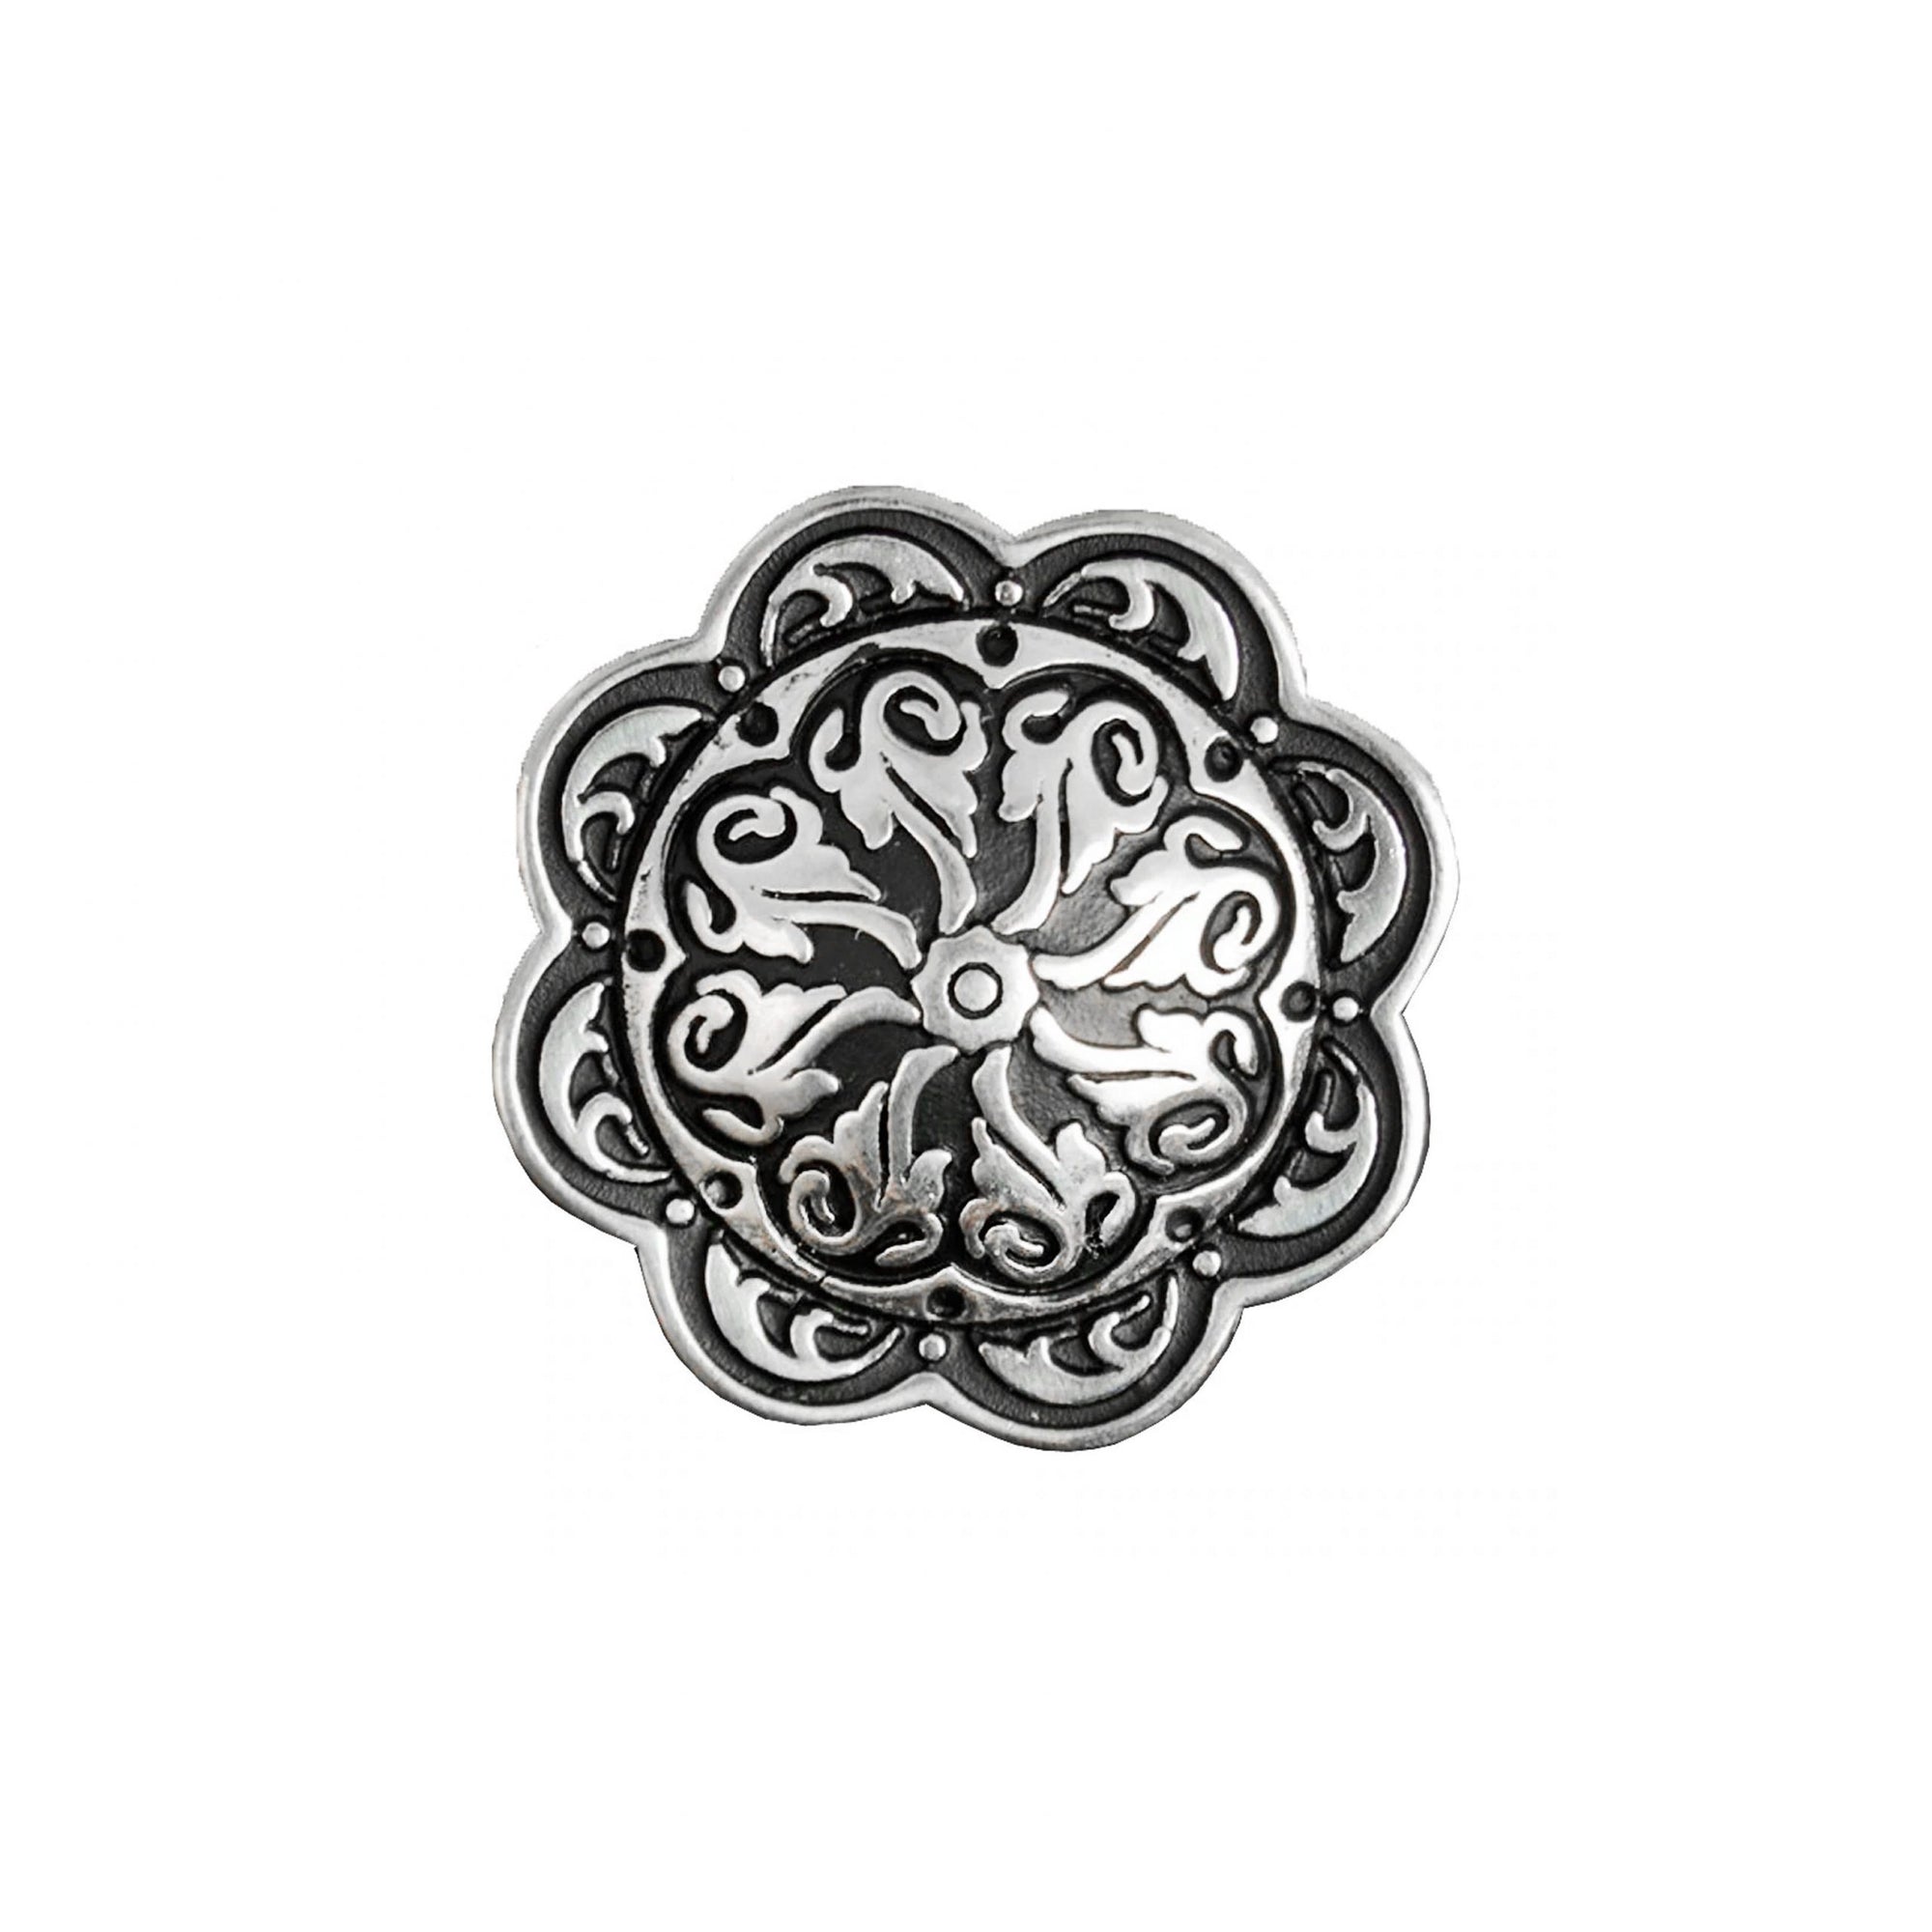 Floral Concho 1.5 inches diameter